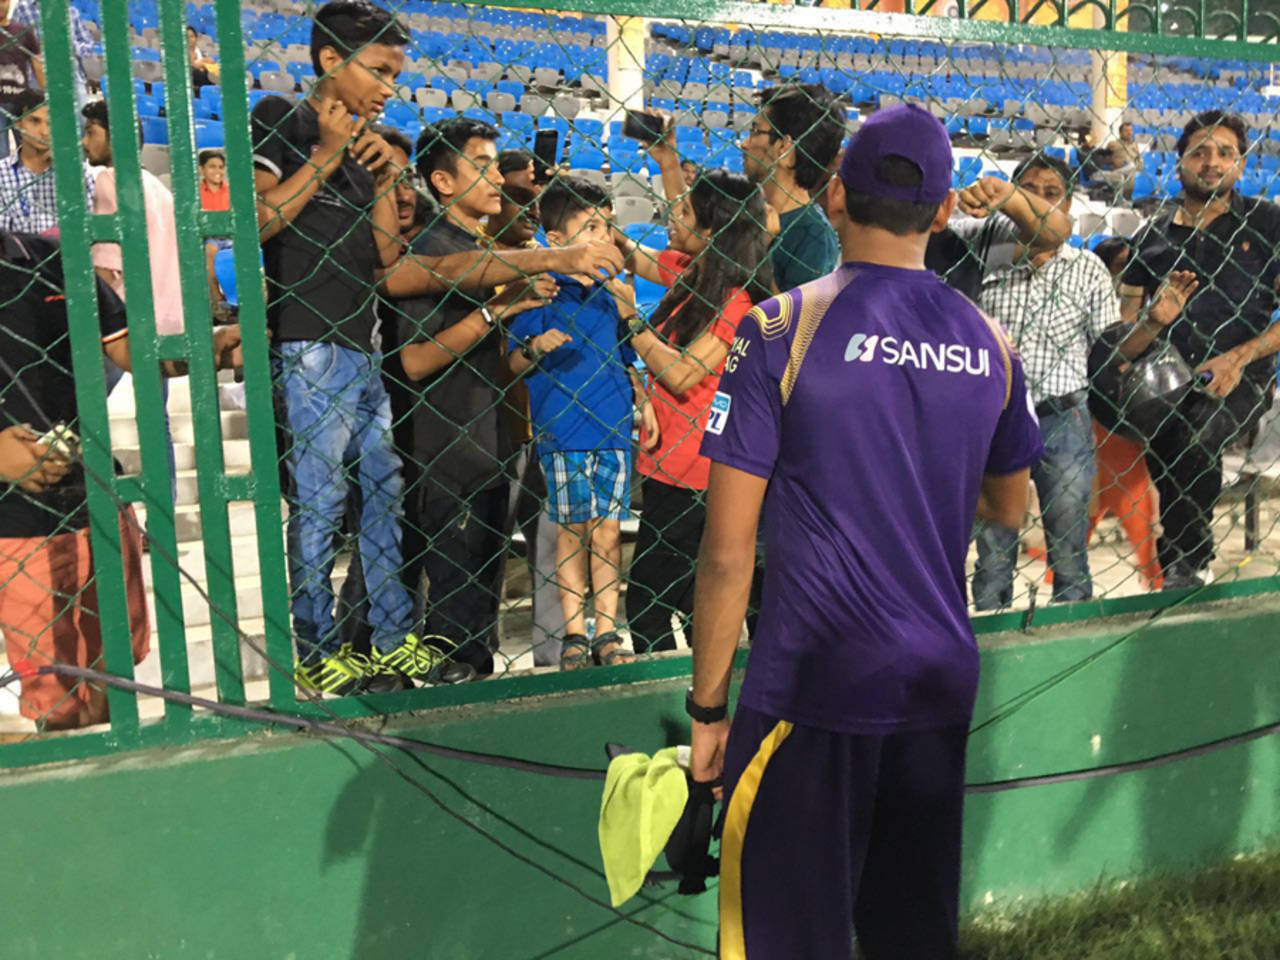 Ankit Rajpoot obliges excited fans in Kanpur, posing for a selfie on the eve of the city's first IPL match&nbsp;&nbsp;&bull;&nbsp;&nbsp;ESPNcricinfo